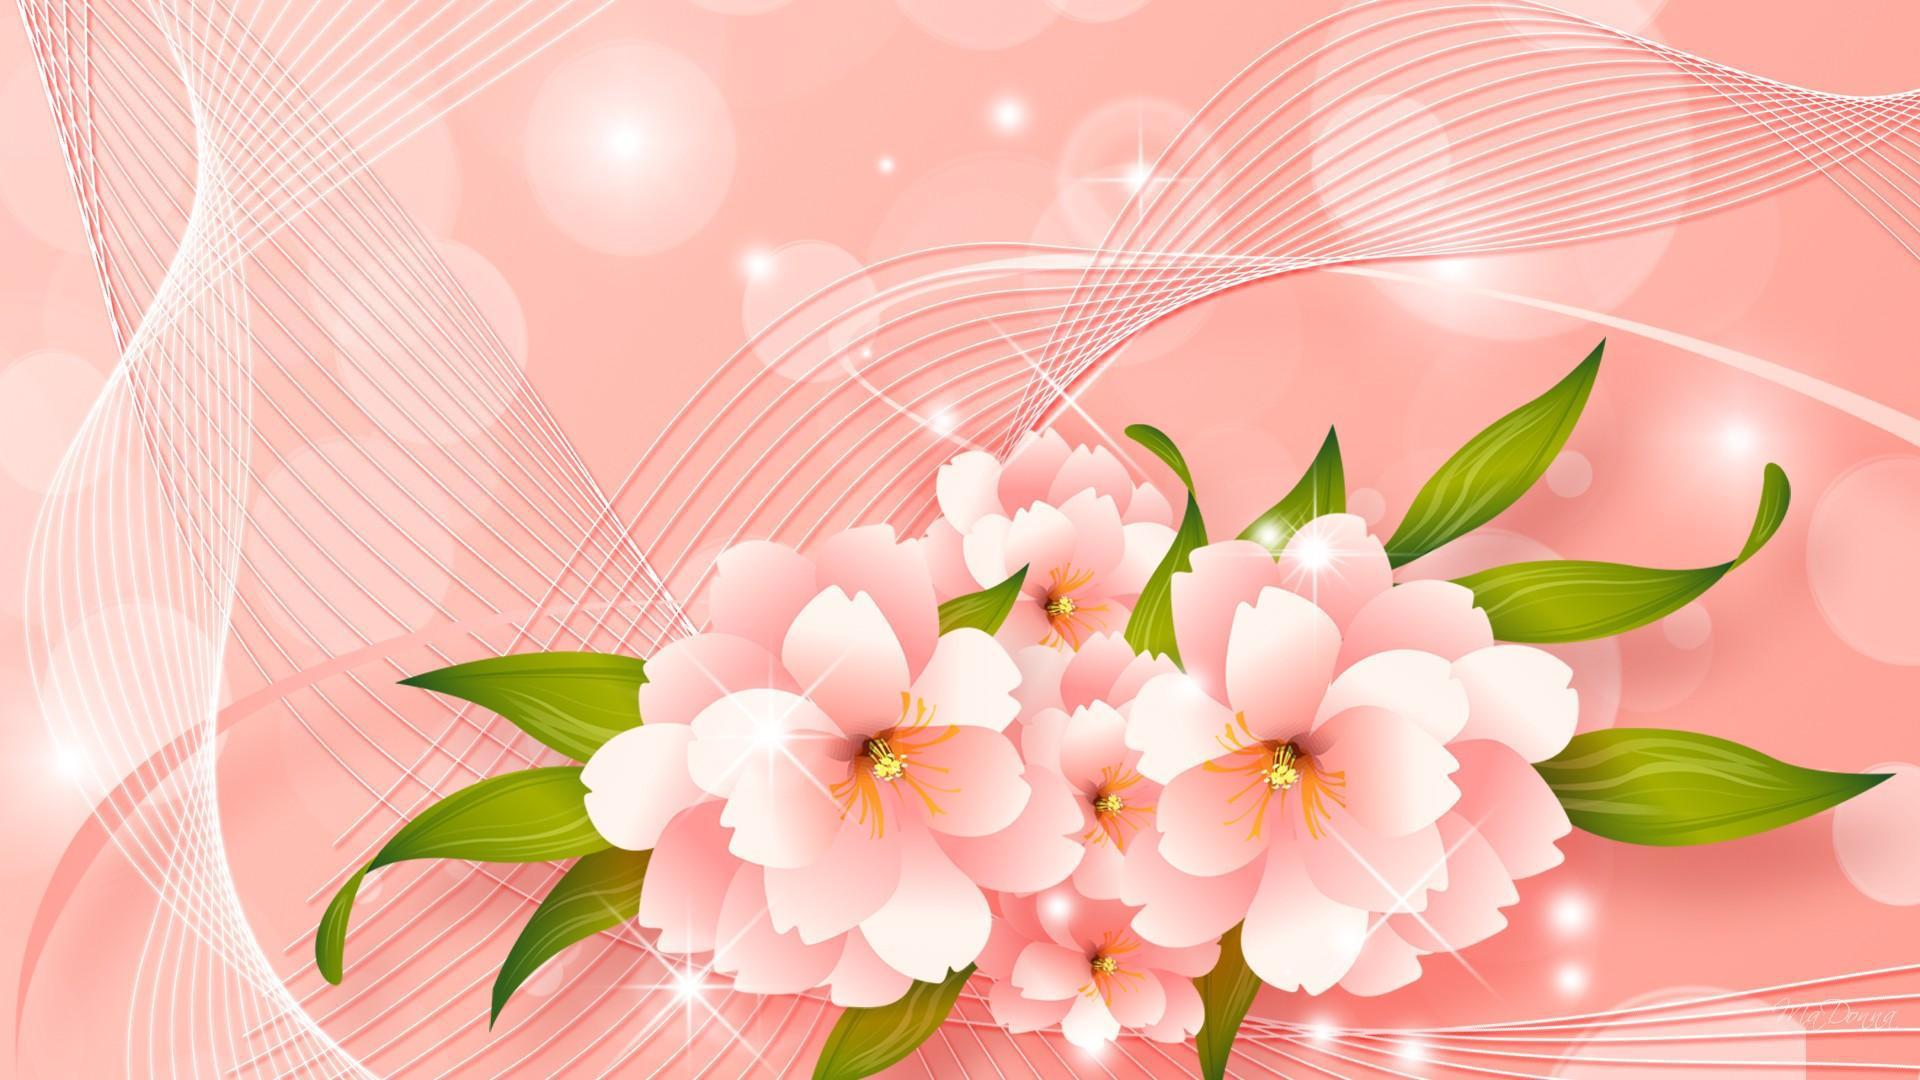 Abstract Floral Background HD